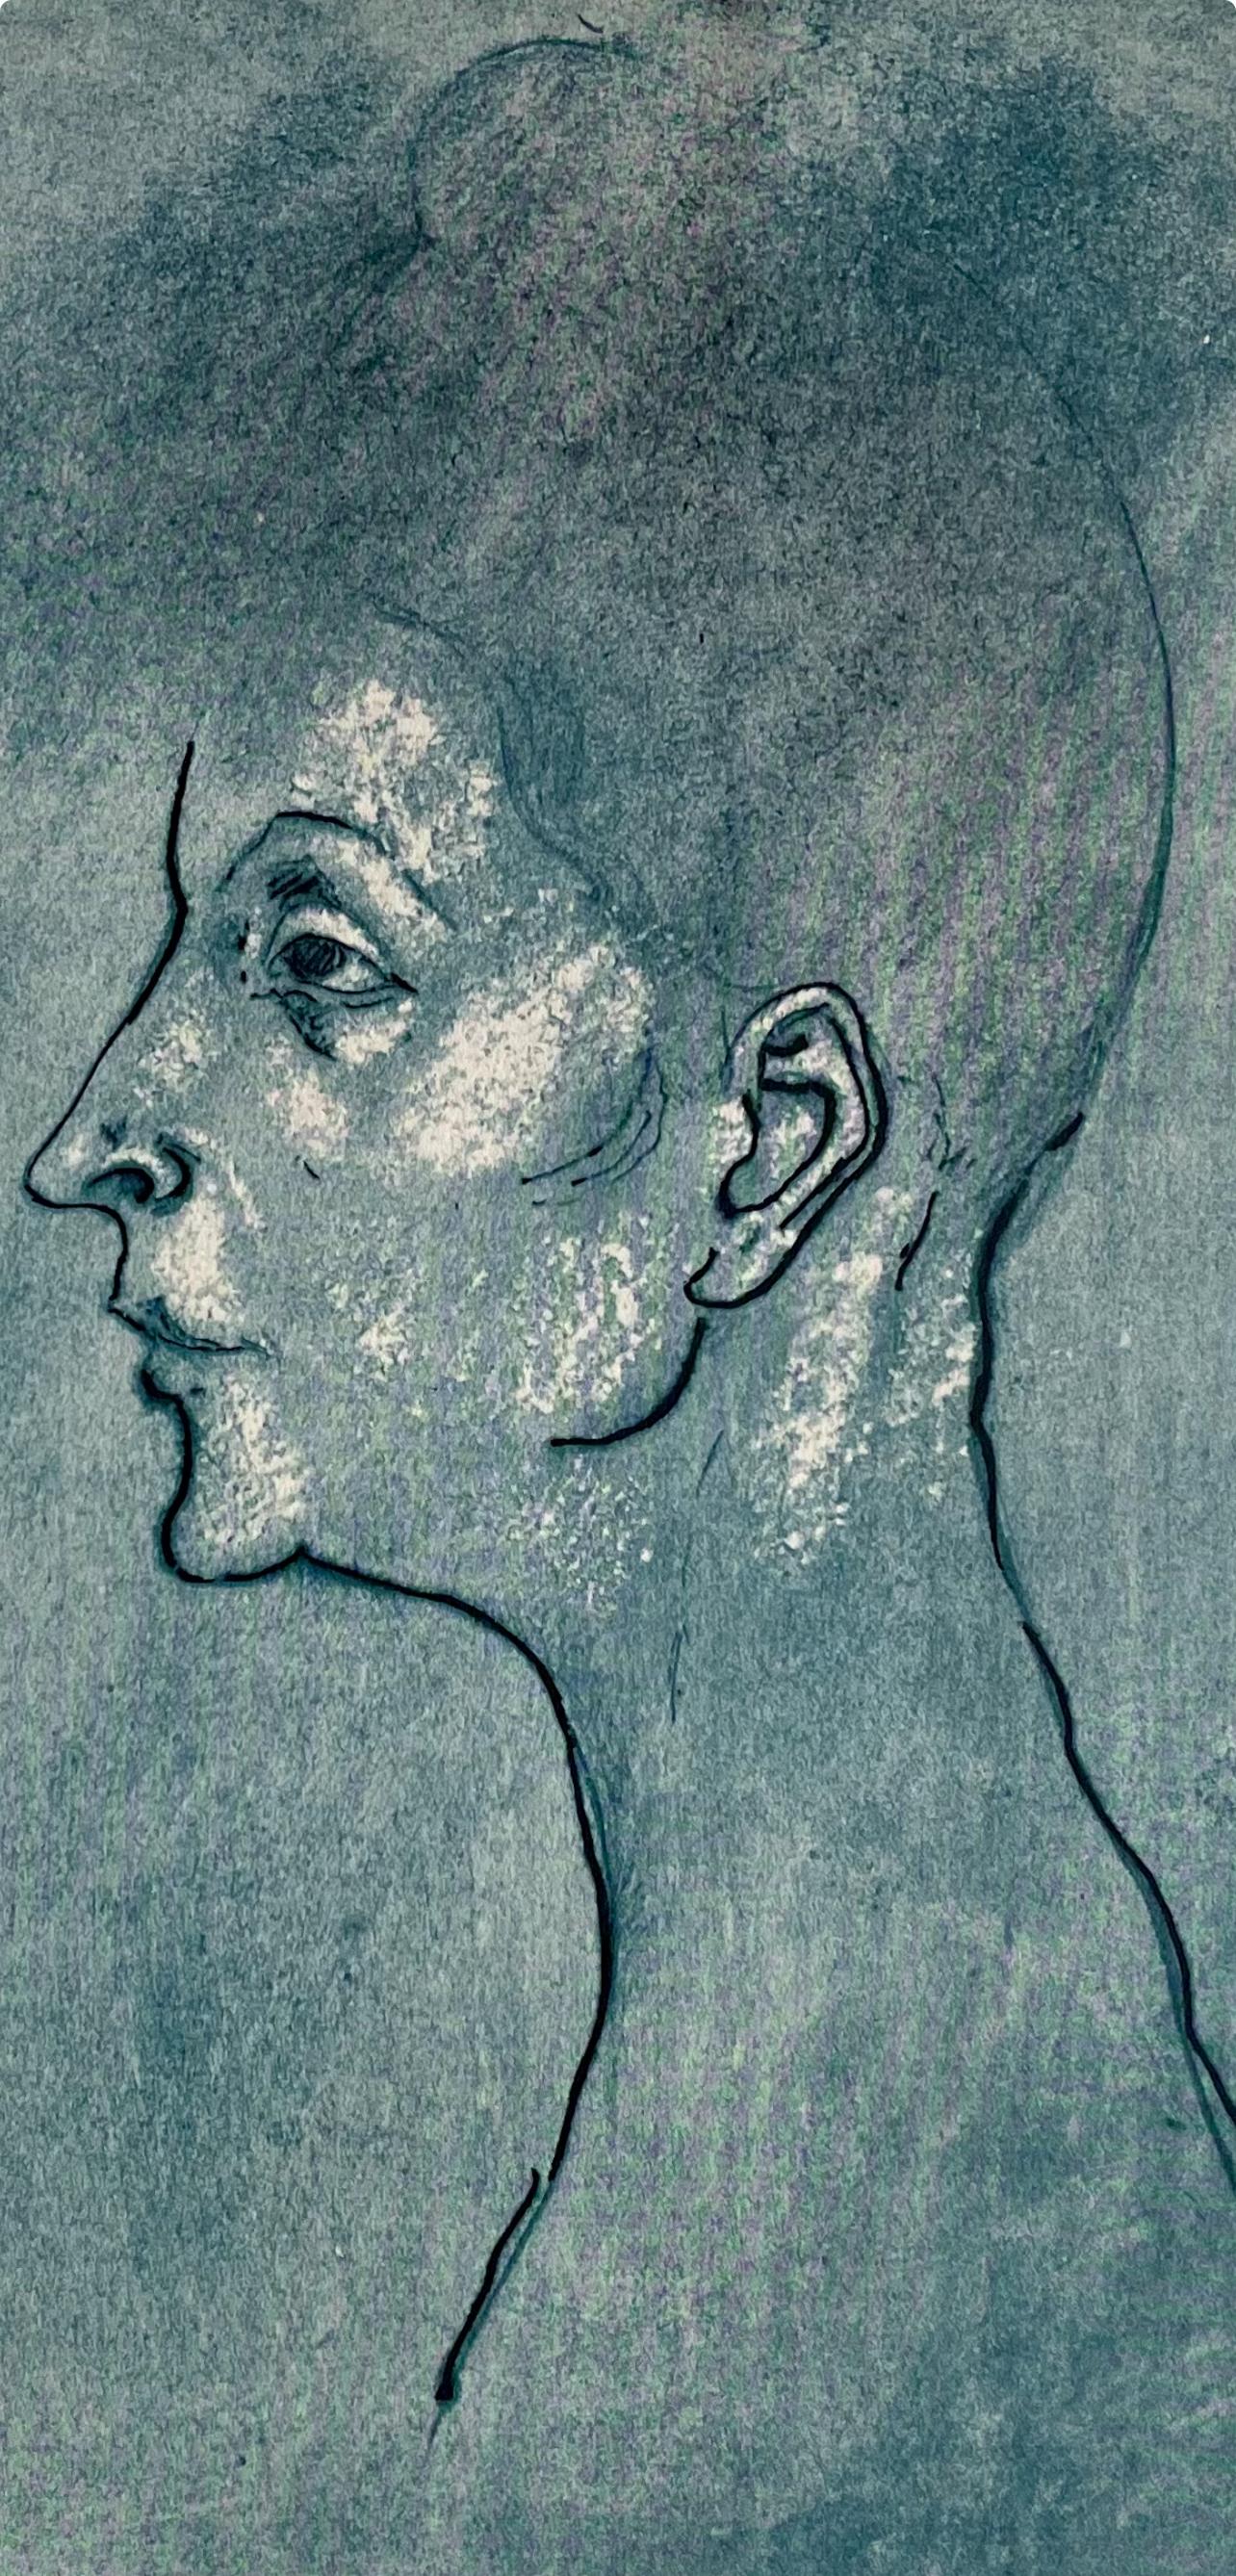 Picasso, Head of a Woman, Picasso: Fifteen Drawings (after) - Print by Pablo Picasso